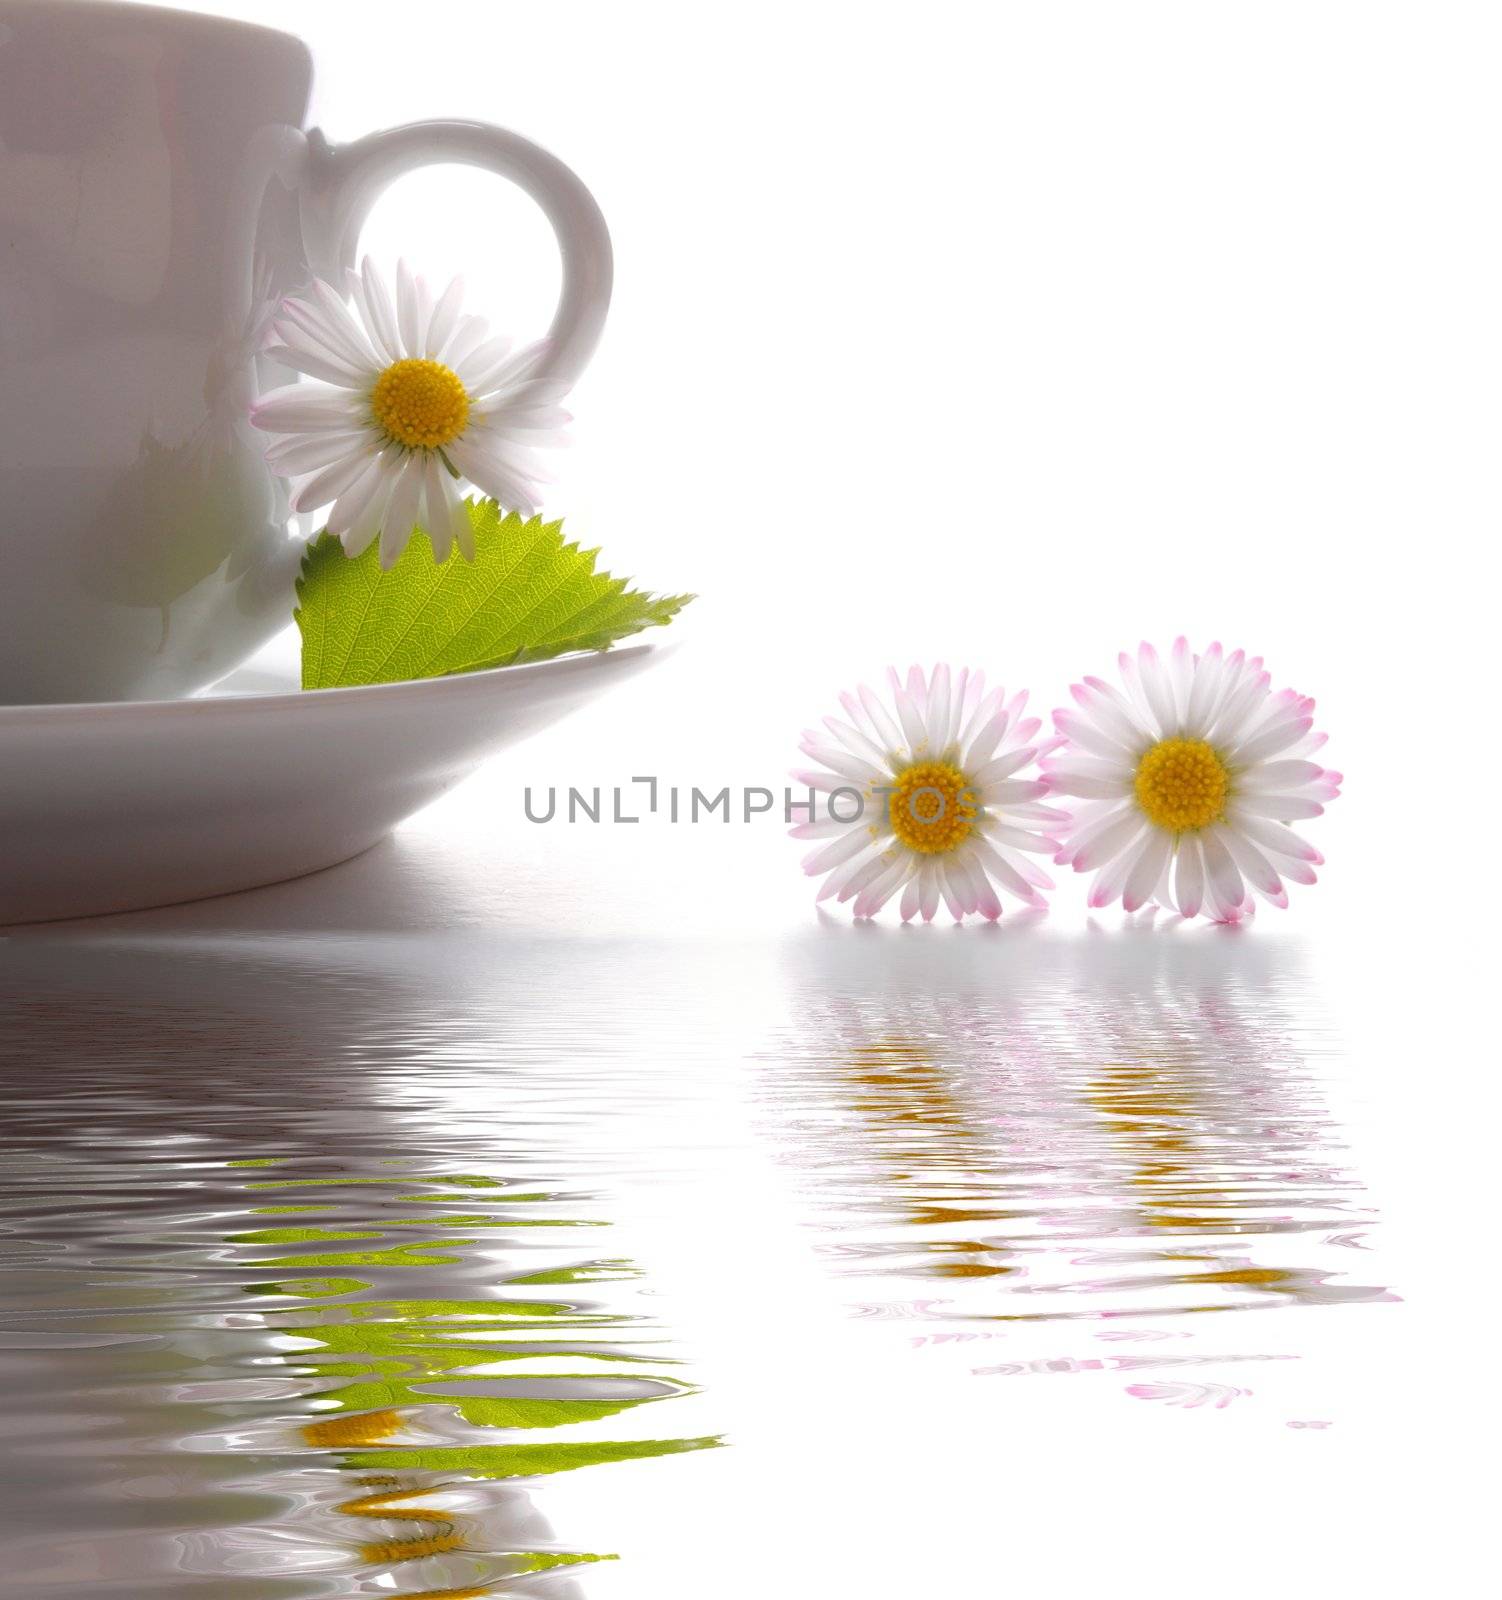 cup of tea or coffee with flowers and water reflection